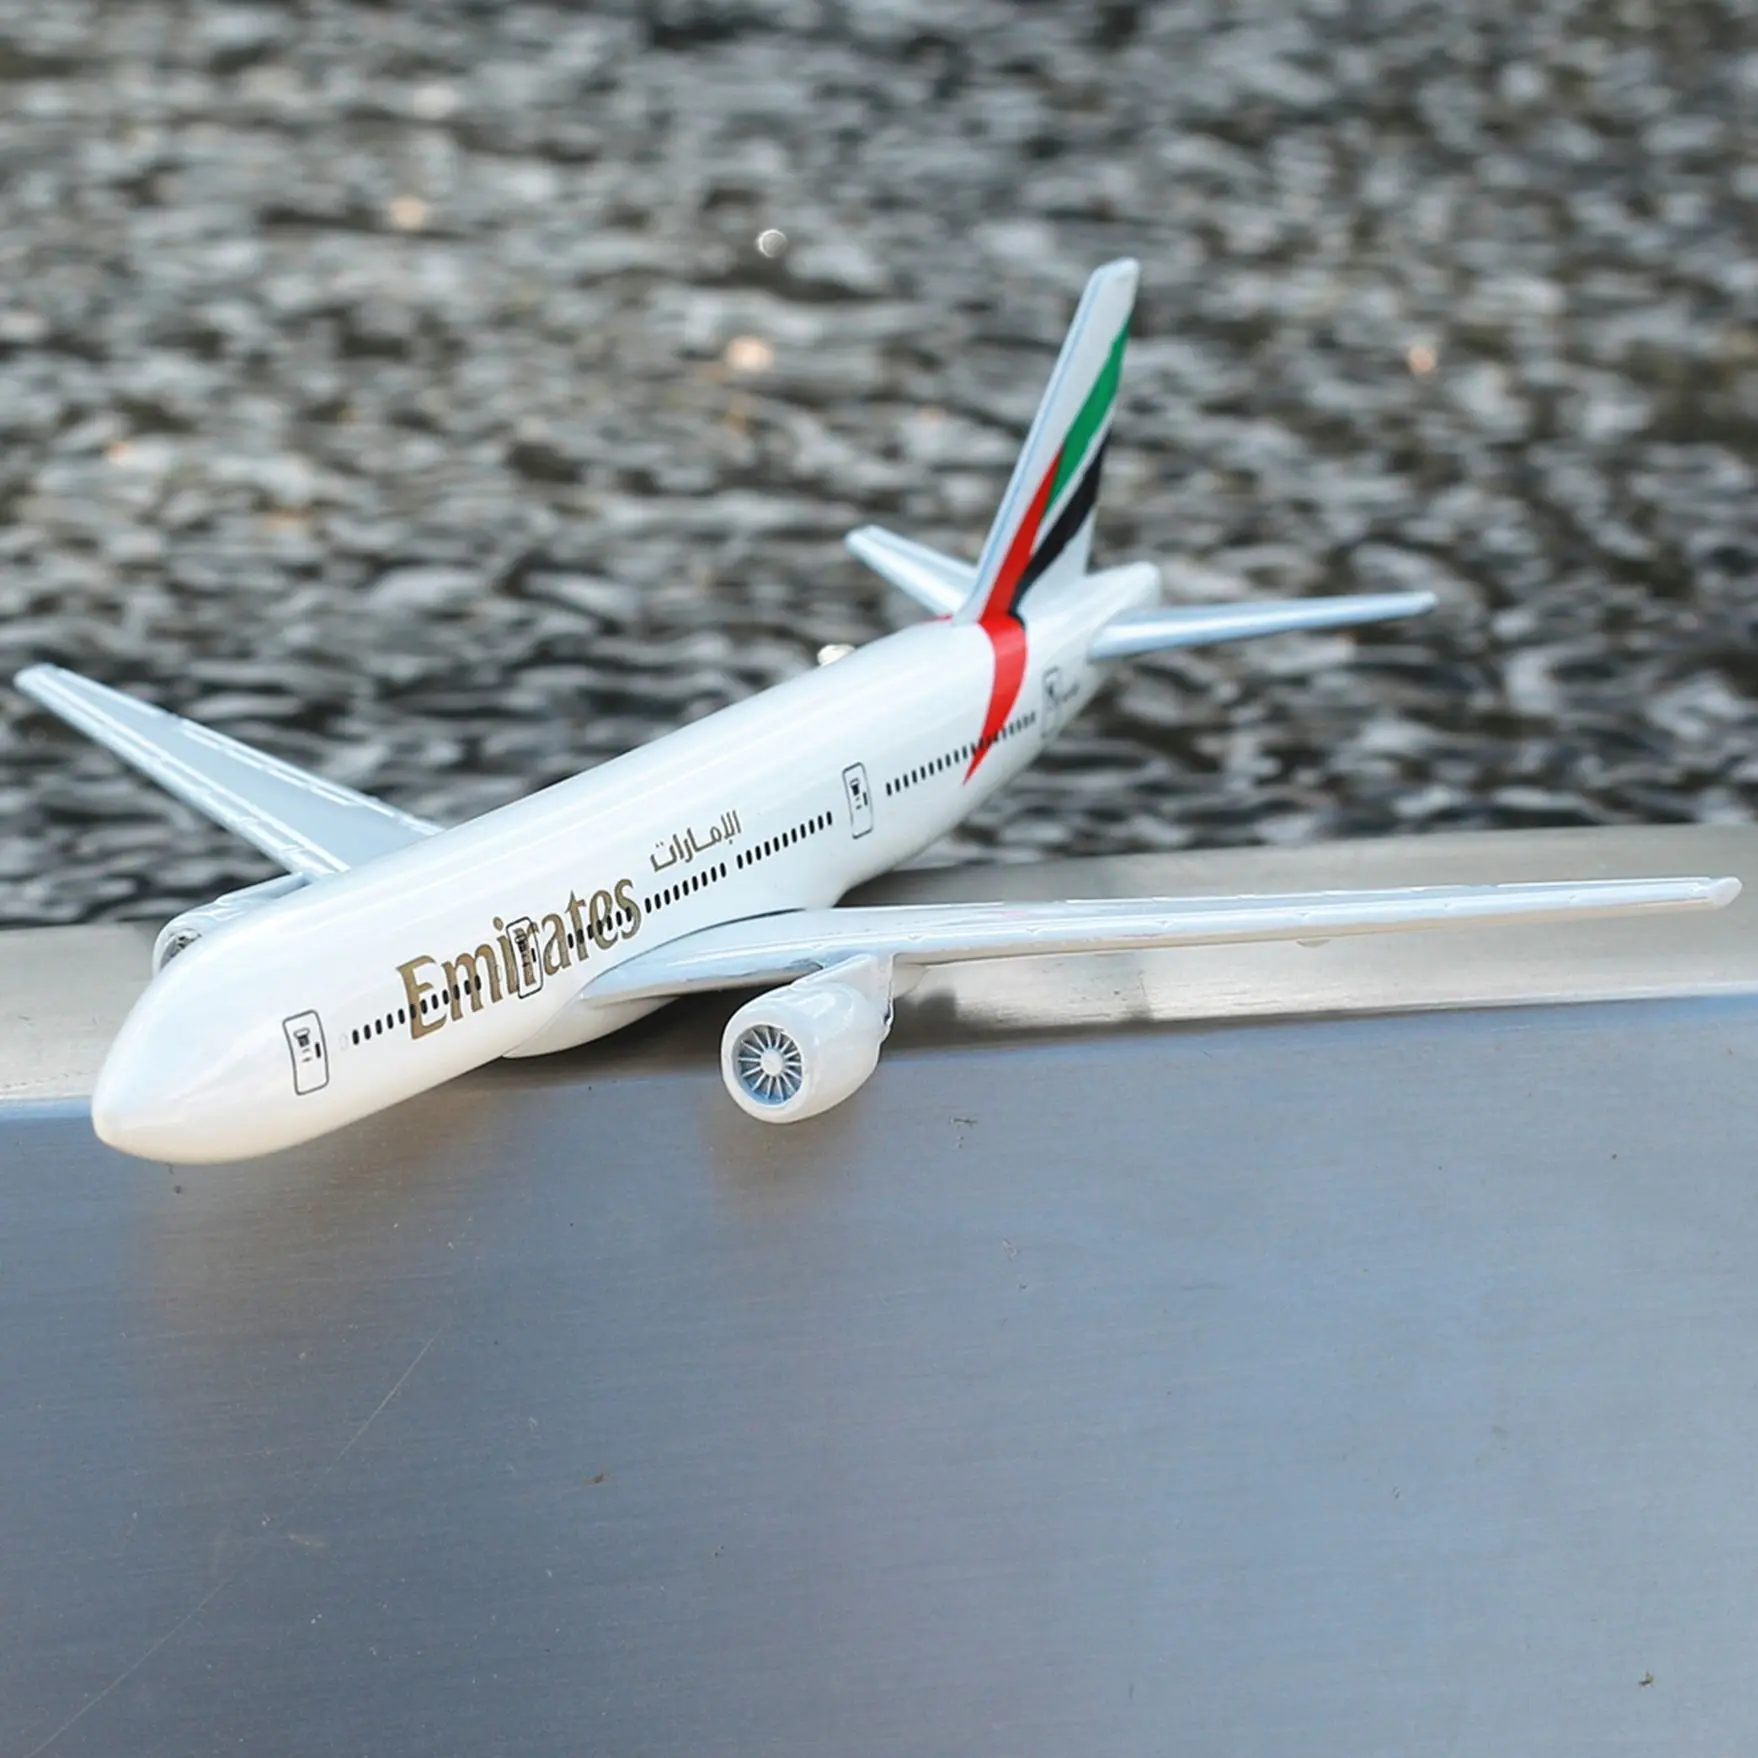 

Emirates Airlines Boeing 777 Aircraft Aviation Model 6" Metal Airplane Diecast Mini Moto Collection Pilot Eduactional Toys